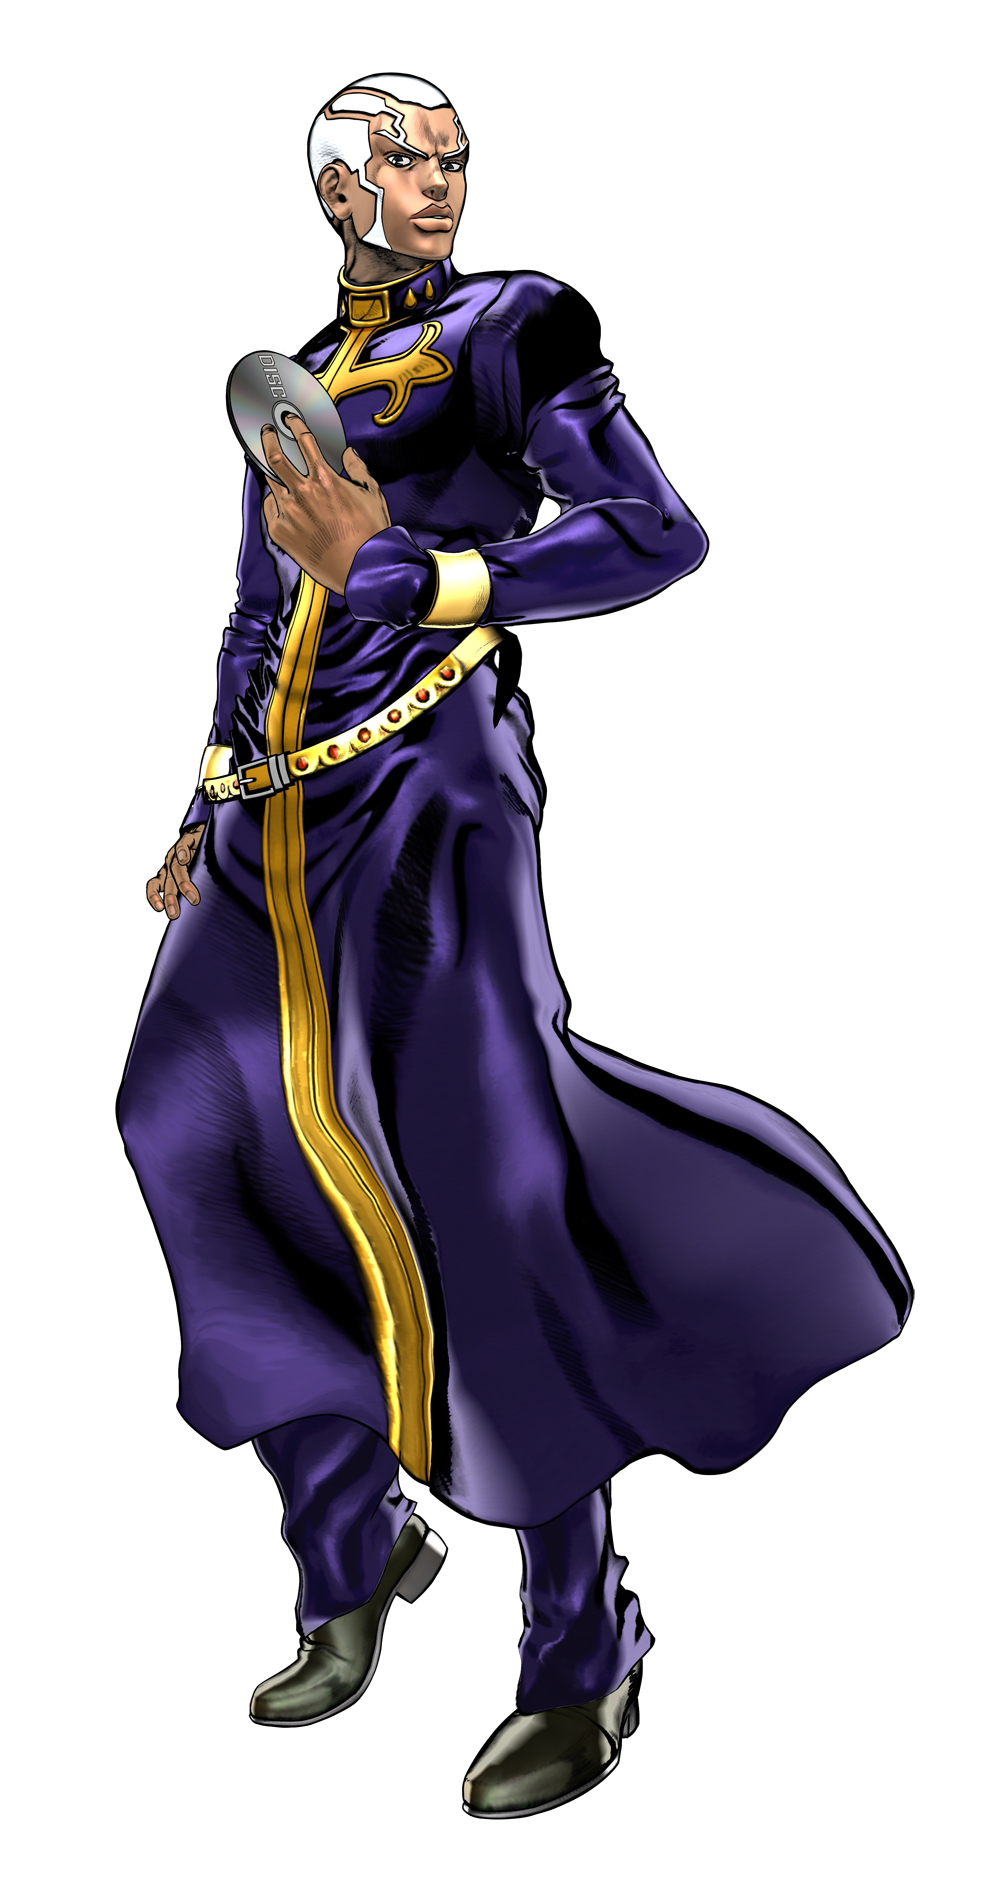 Pucci anime accurate style by elaztecarome on DeviantArt